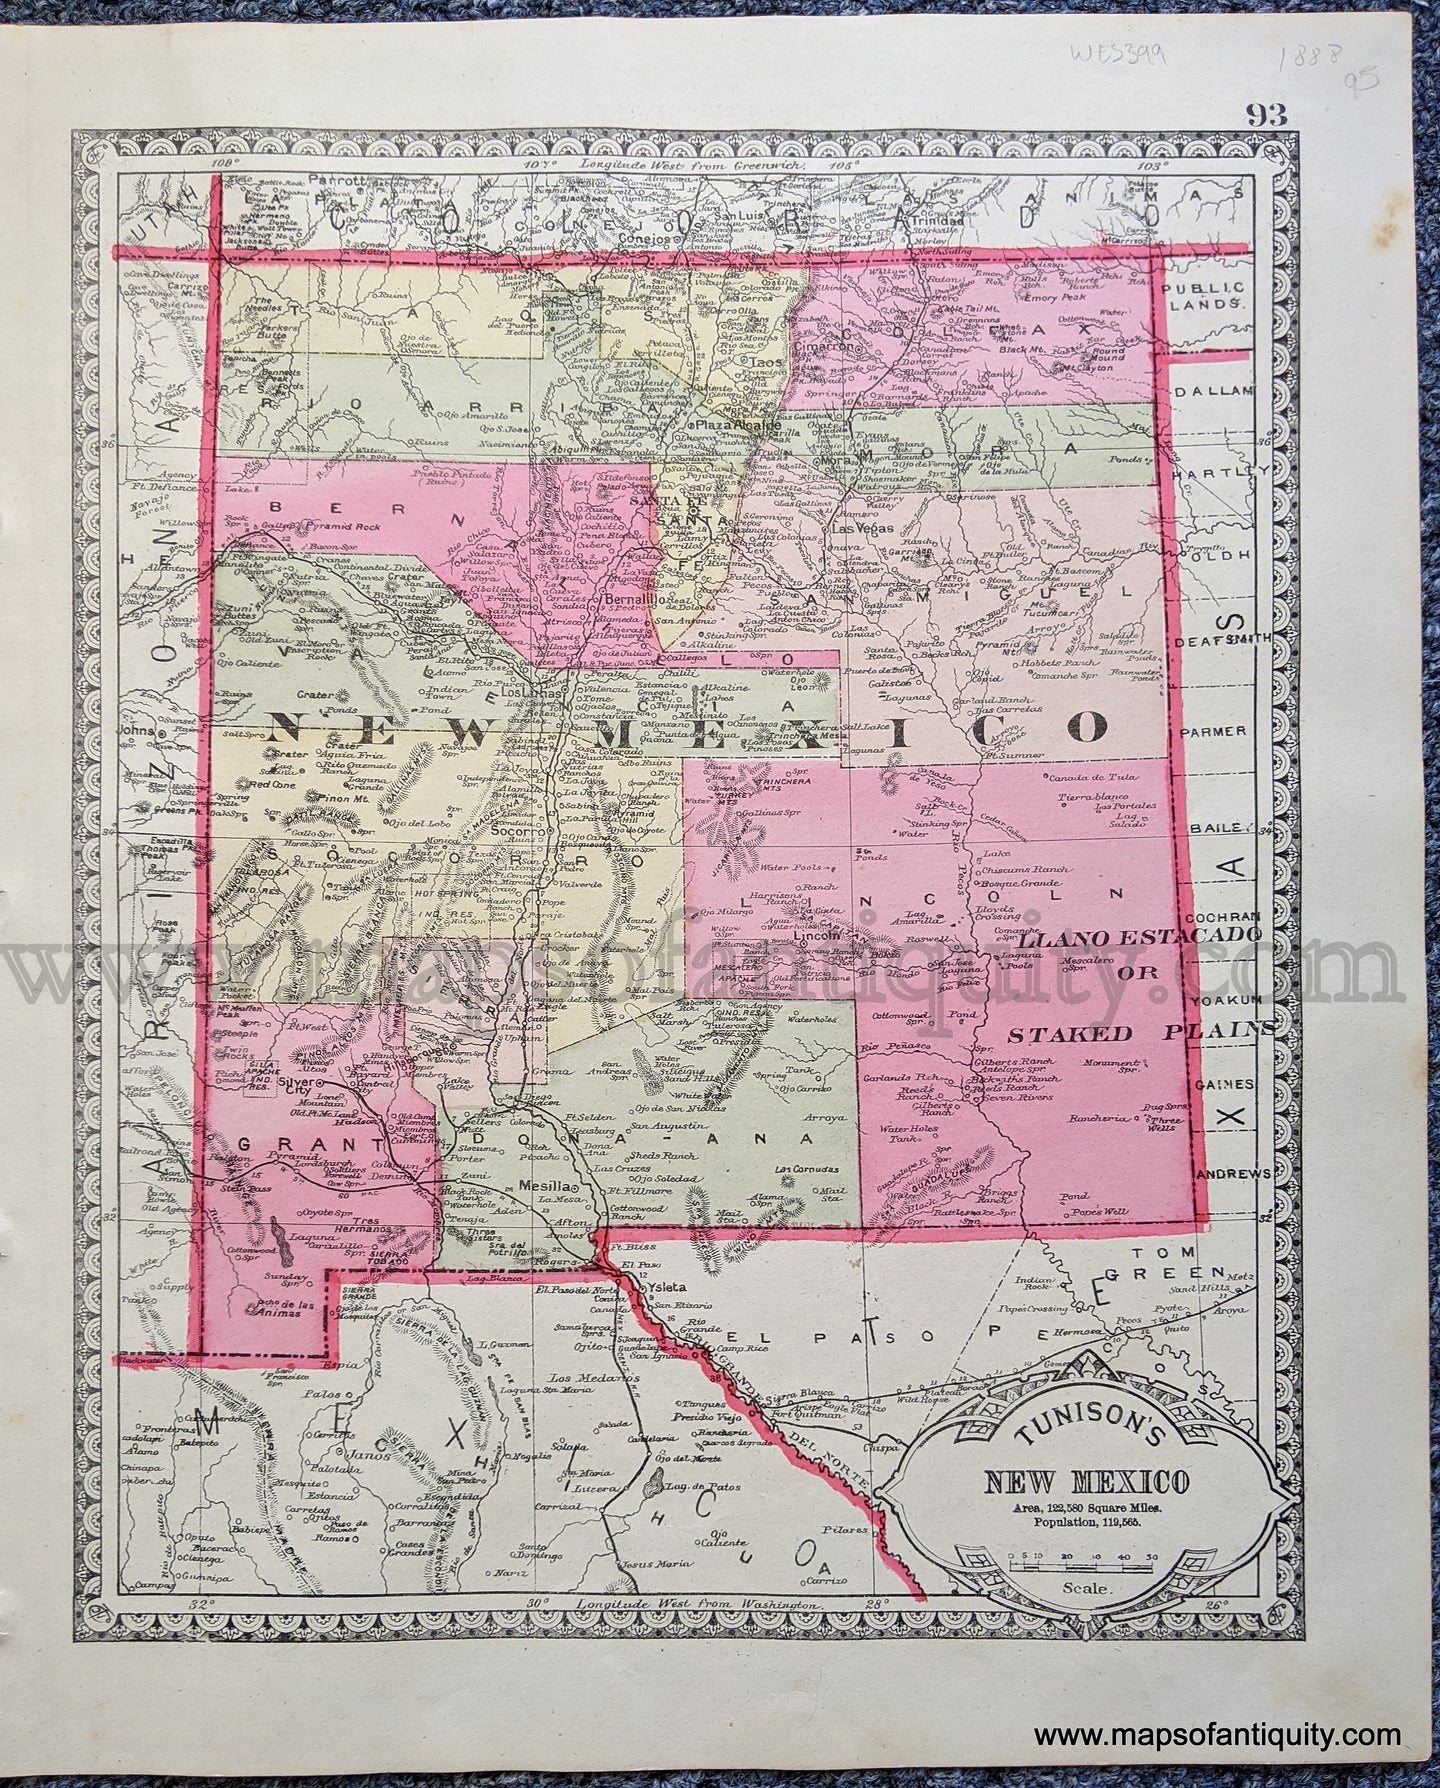 Antique-Map-Tunison's-New-Mexico;-verso:-Tunison's-Utah-Territory-and-Tunison's-Washington-Territory-United-States-West-1888-Tunison-Maps-Of-Antiquity-1800s-19th-century